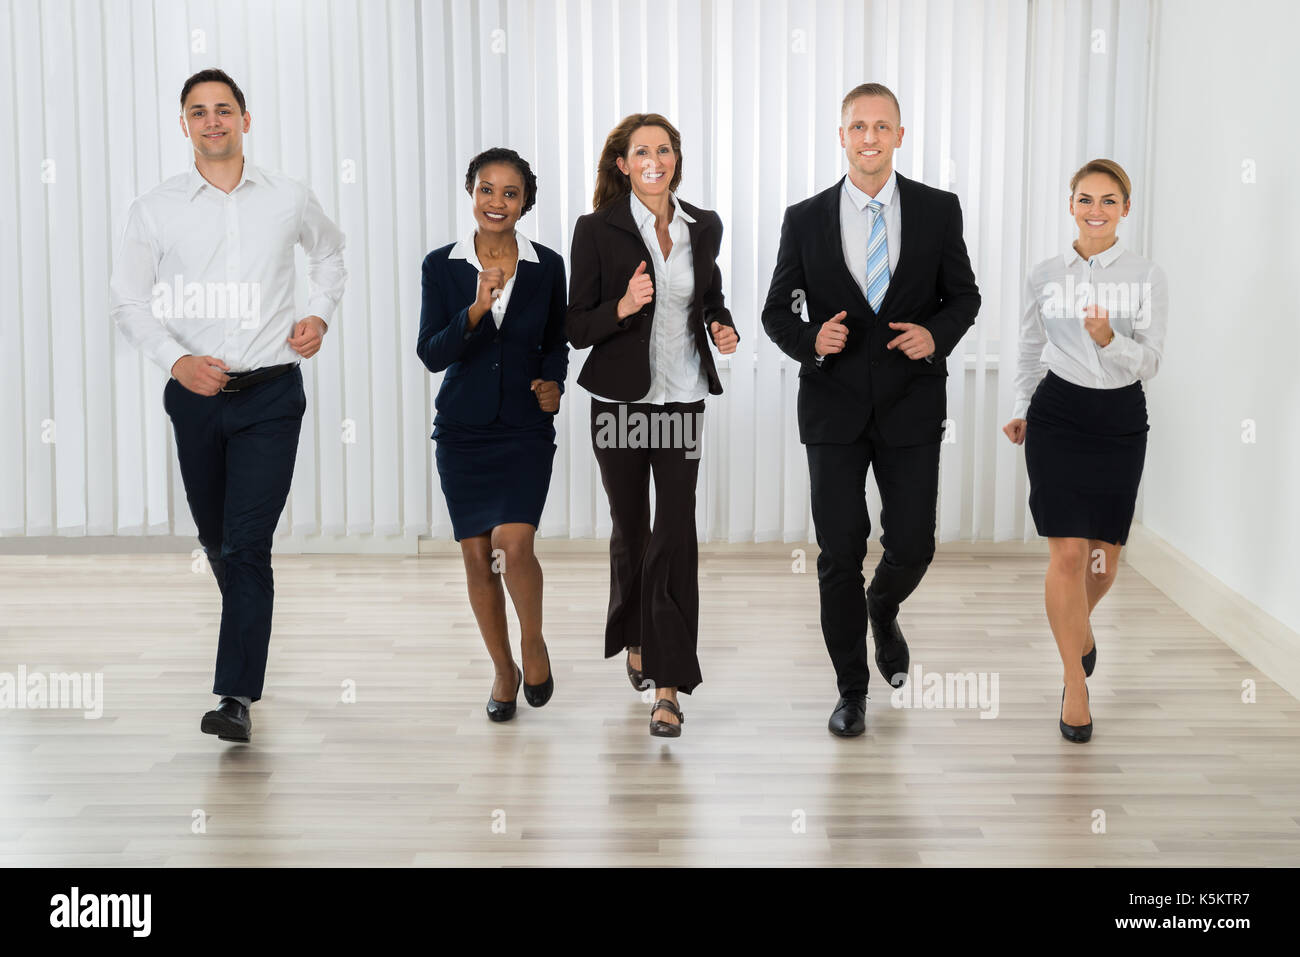 Group Of Professional Businesspeople Together Running In Office Stock Photo